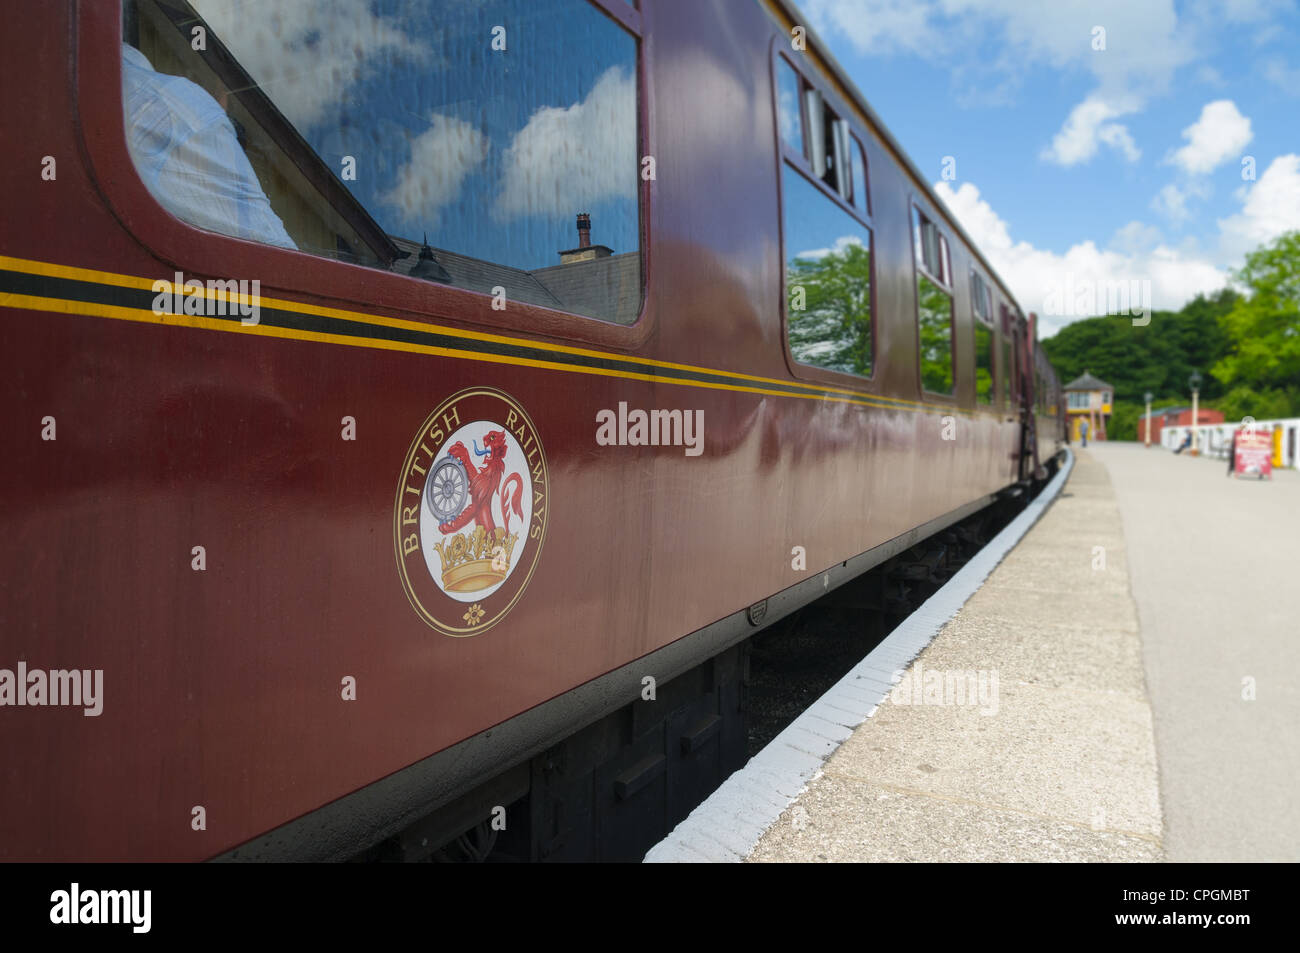 Bolton Abbey Train pulled into the station at Bolton Abbey, Railway Station, Yorkshire, England Stock Photo